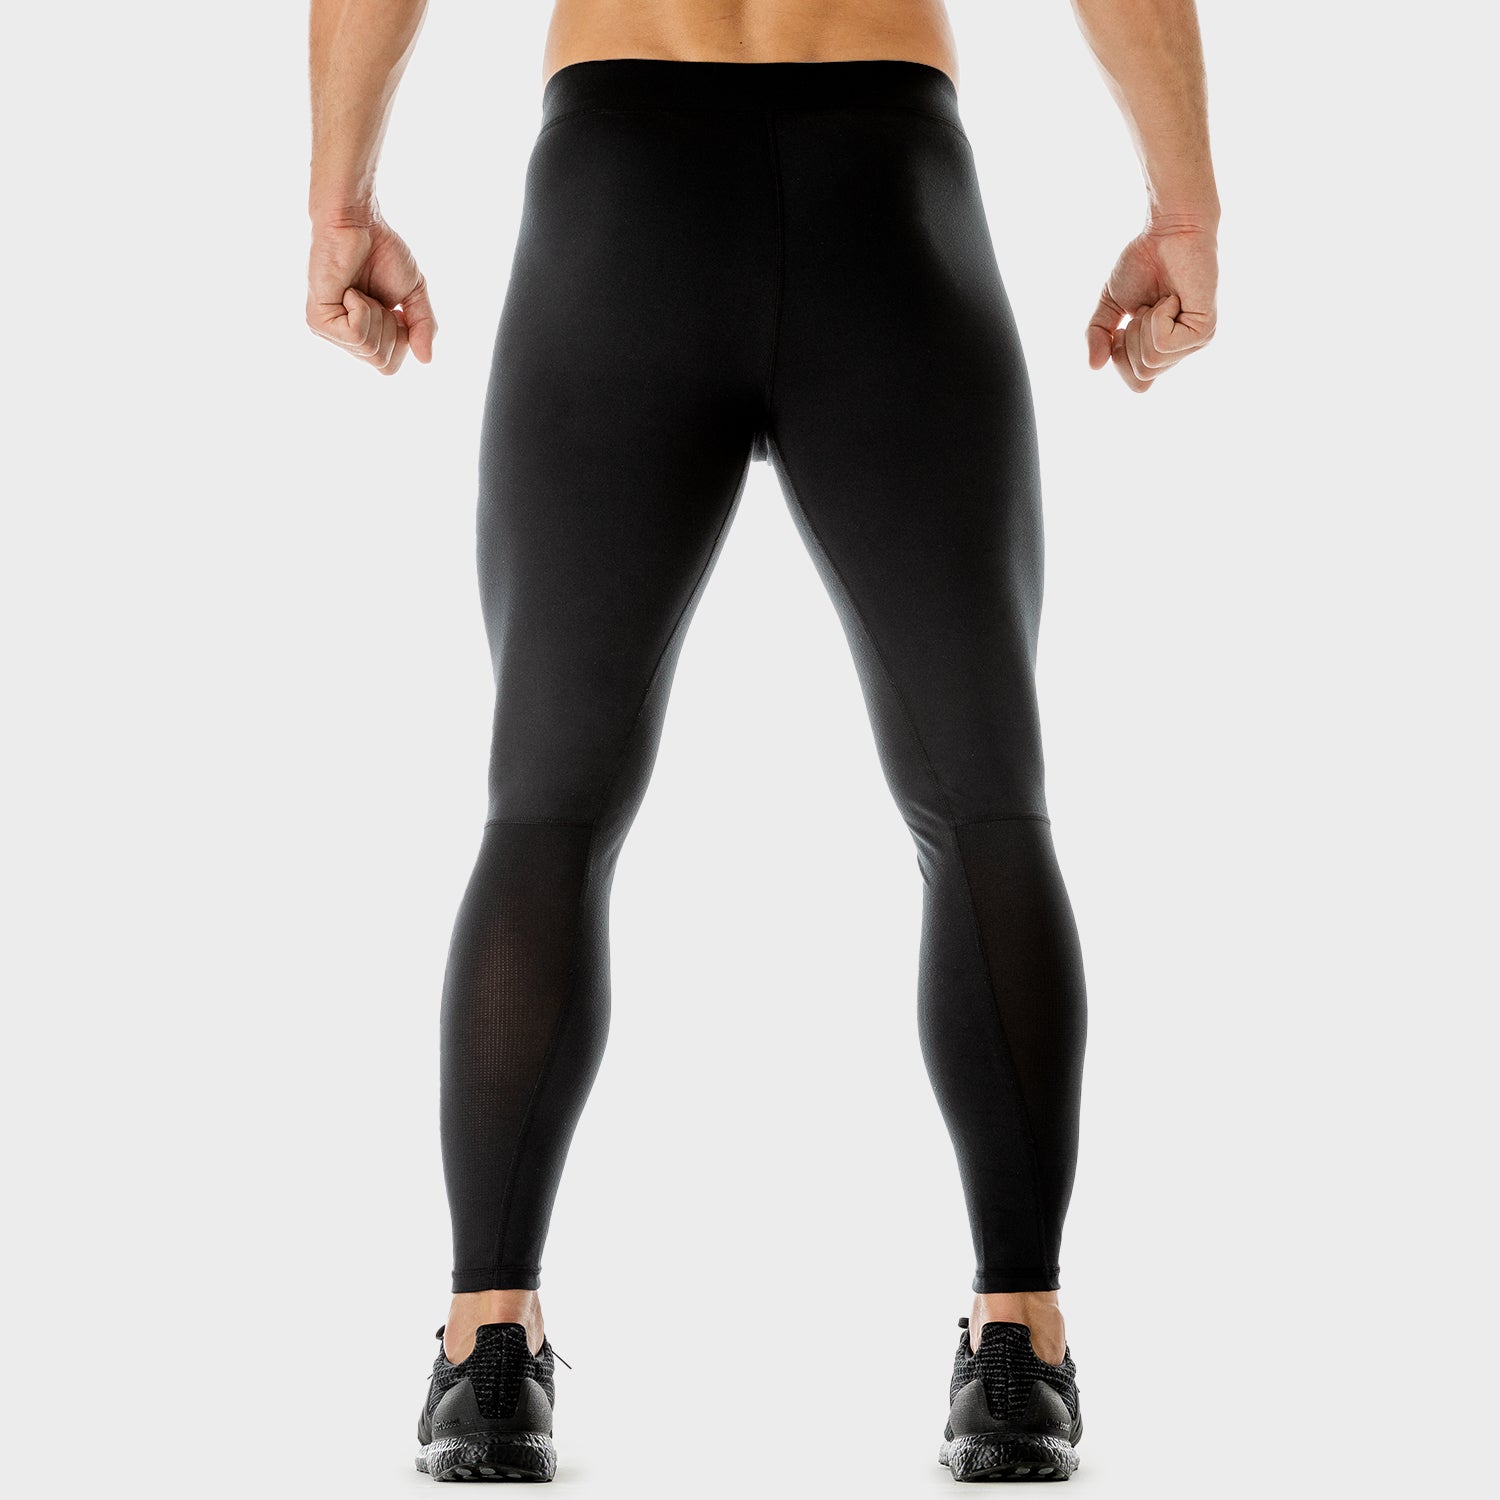 squatwolf-gym-leggings-for-men-lab-360-performance-tights-black-workout-clothes